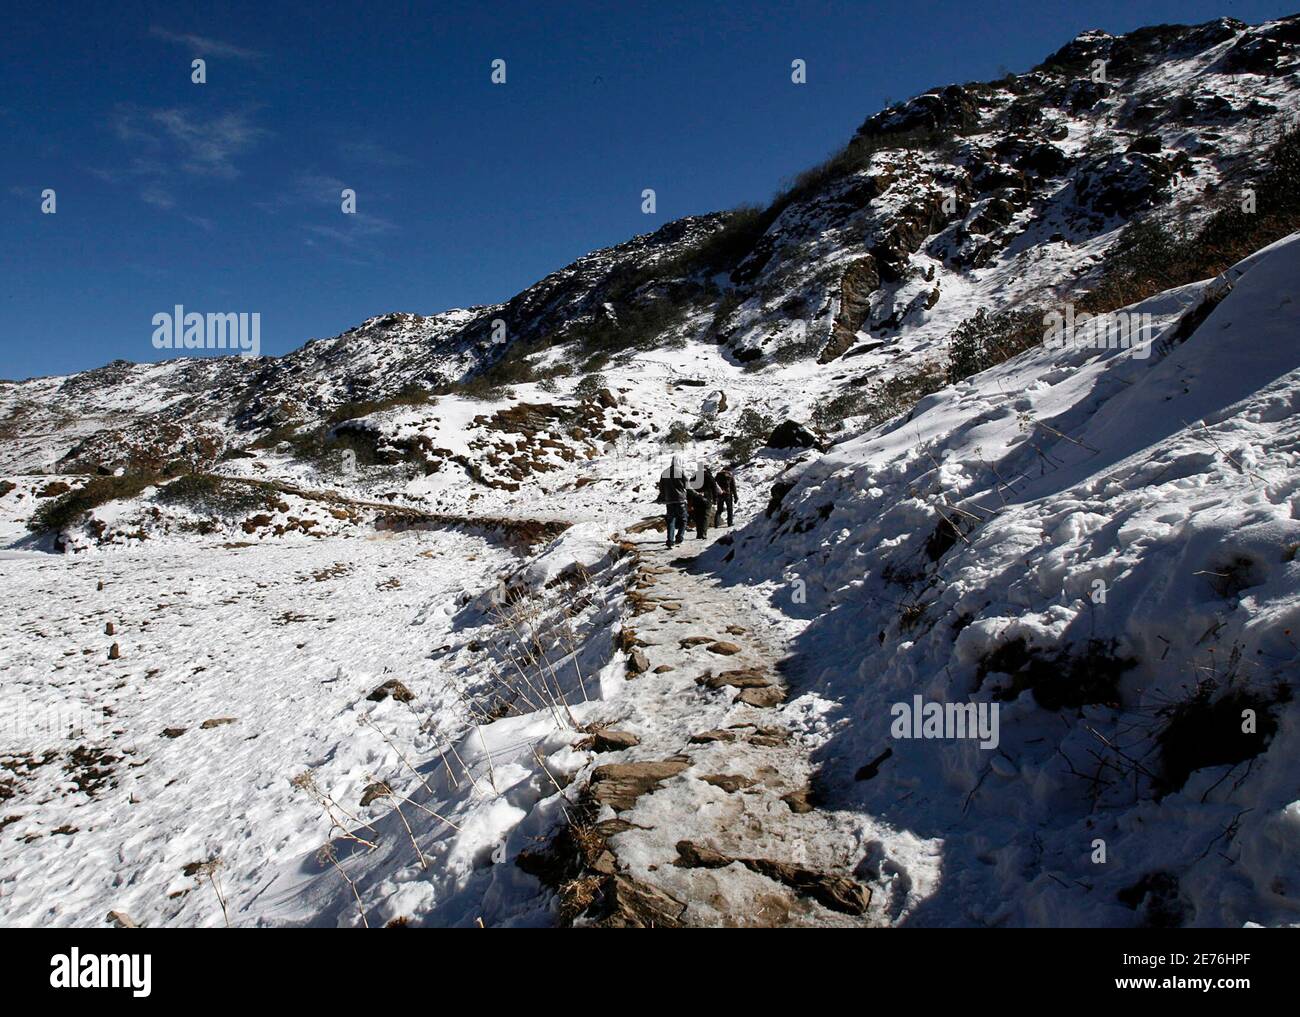 Tourists walk amid the snow after a snowfall near Nathu-La, 55 km (34 miles) north of Gangtok, capital of India's northeastern state of Sikkim, January 17, 2009. The Nathu-La mountain pass, known as the old silk route, lies at an altitude of 14,200 ft. bordering between India and China and is covered with snow throughout the year. Picture taken January 17, 2009. REUTERS/Rupak De Chowdhuri (INDIA) Stock Photo